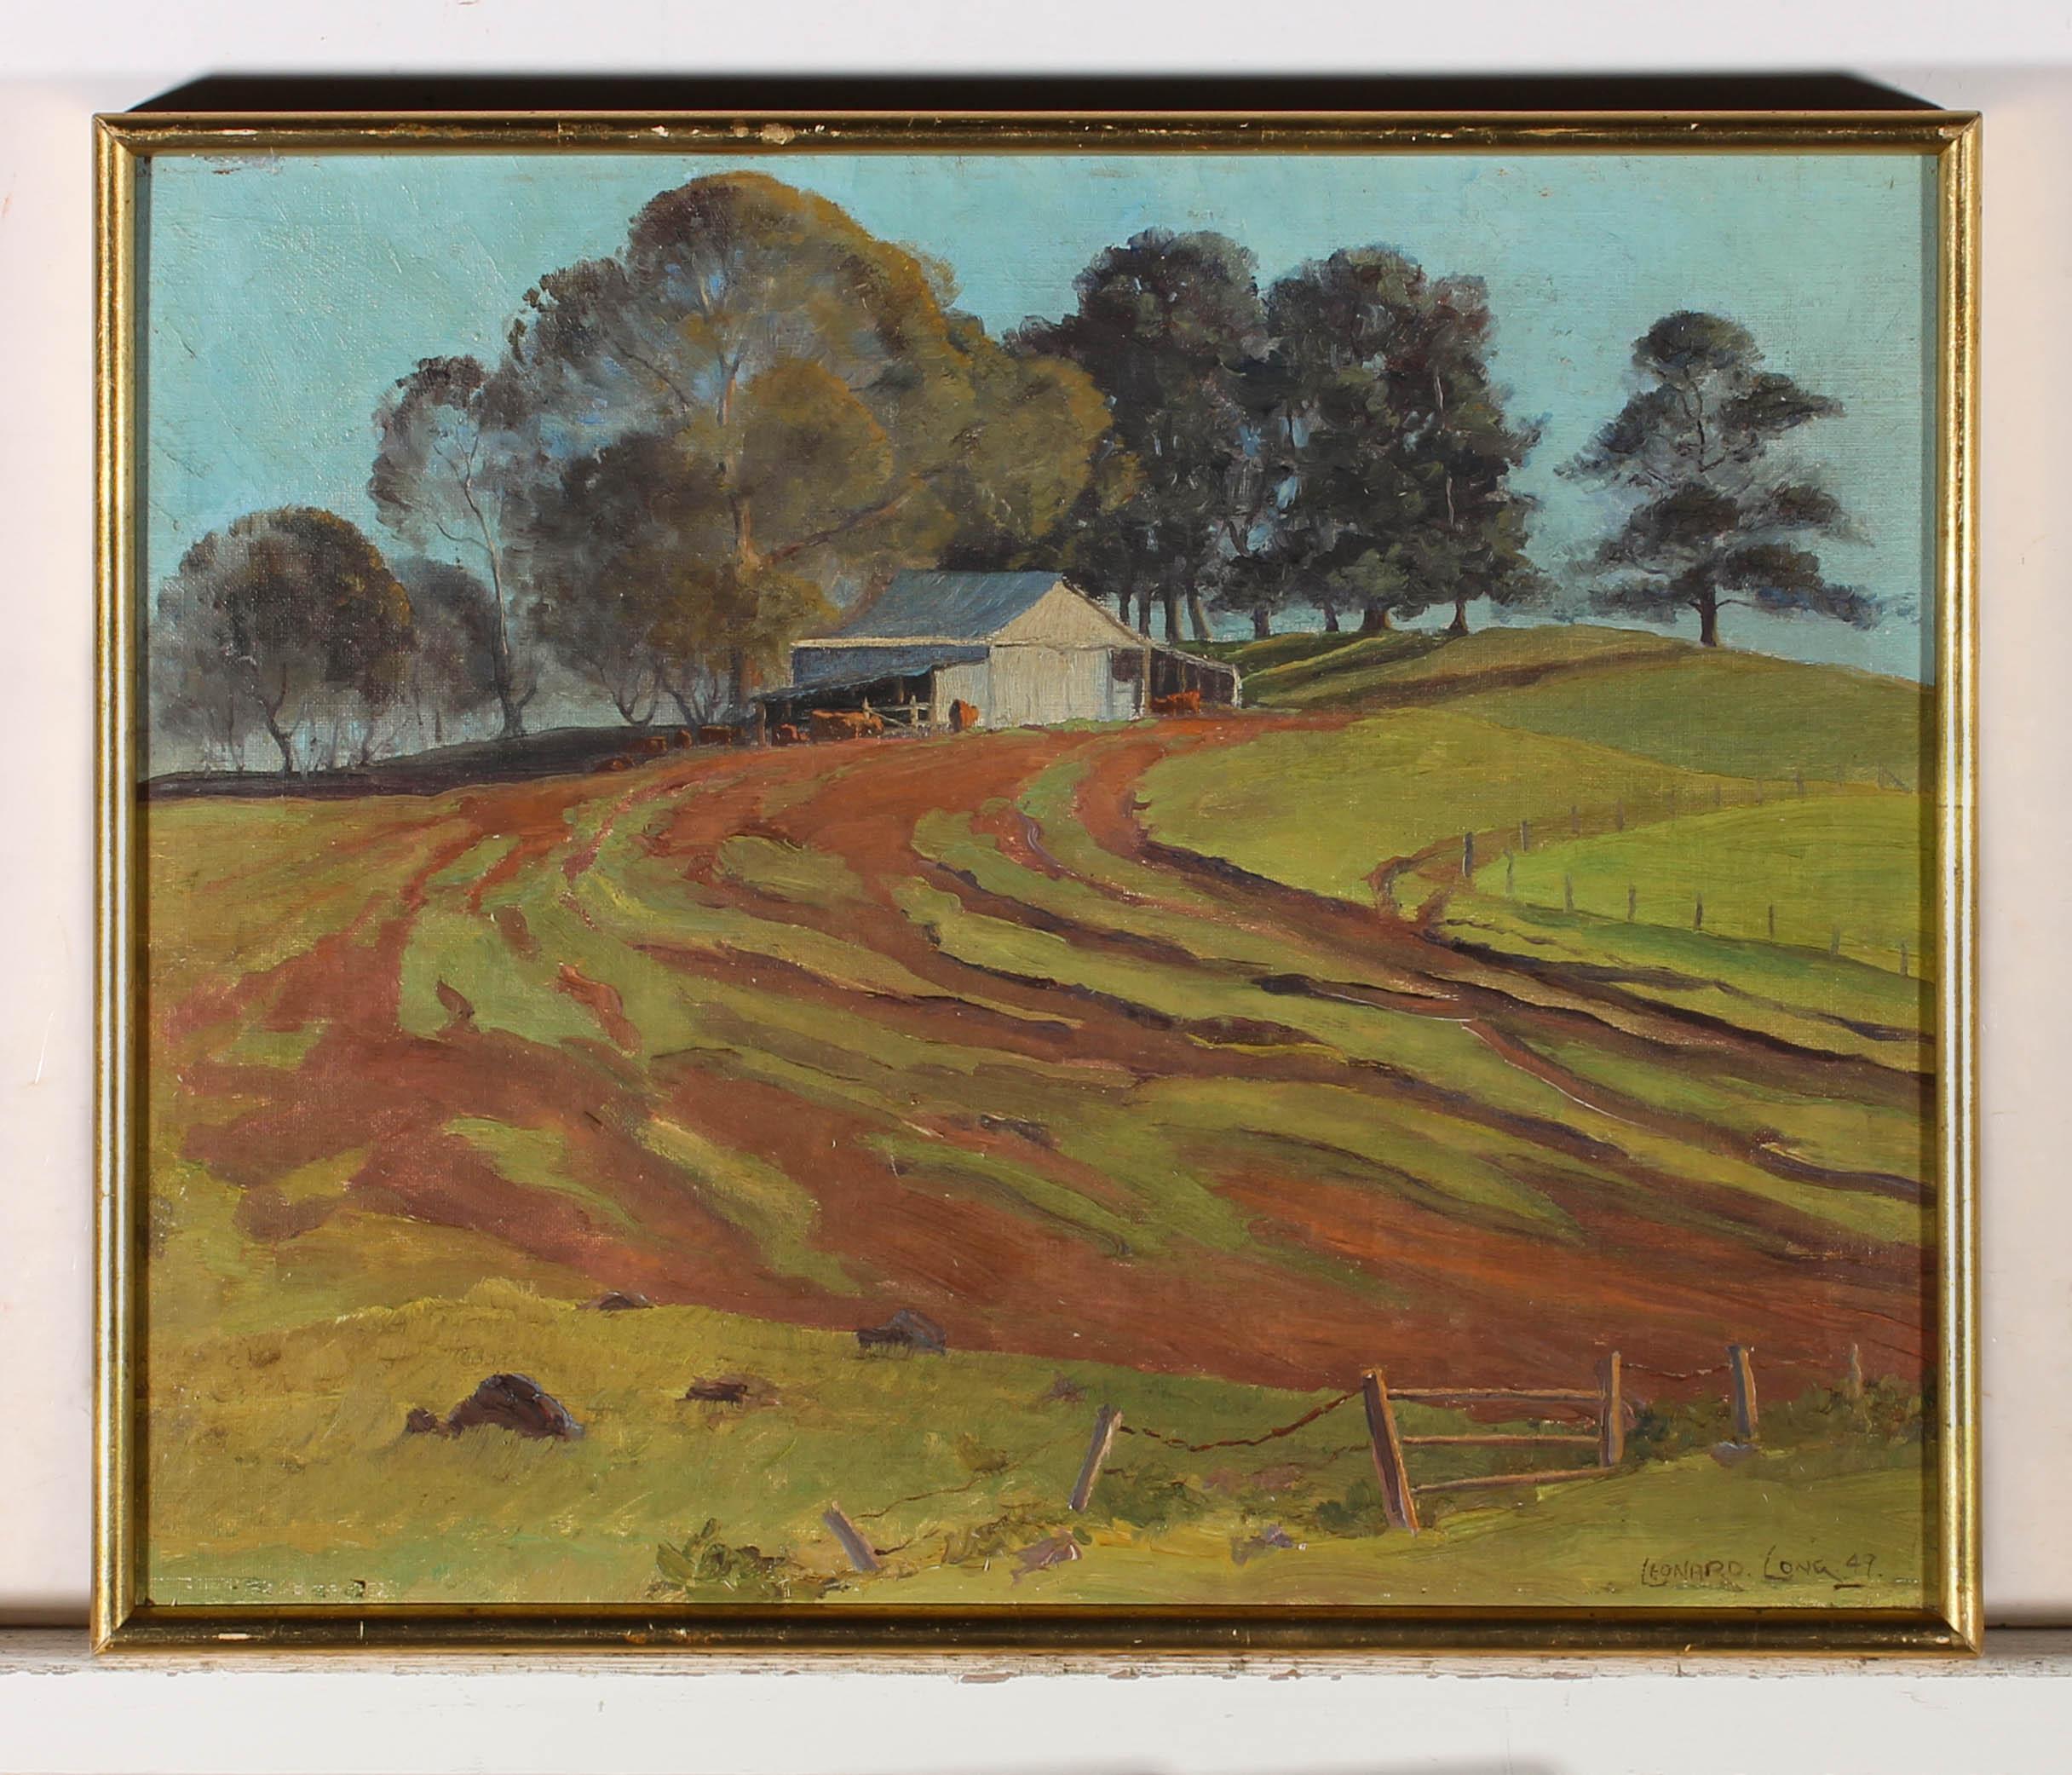 A delightful oil of an Australian rural environment with the farmers feeding shed in the distance. In the foreground we can see the farmers path meandering up to the shed and beyond into the woodland behind. Signed and dated to the lower right with